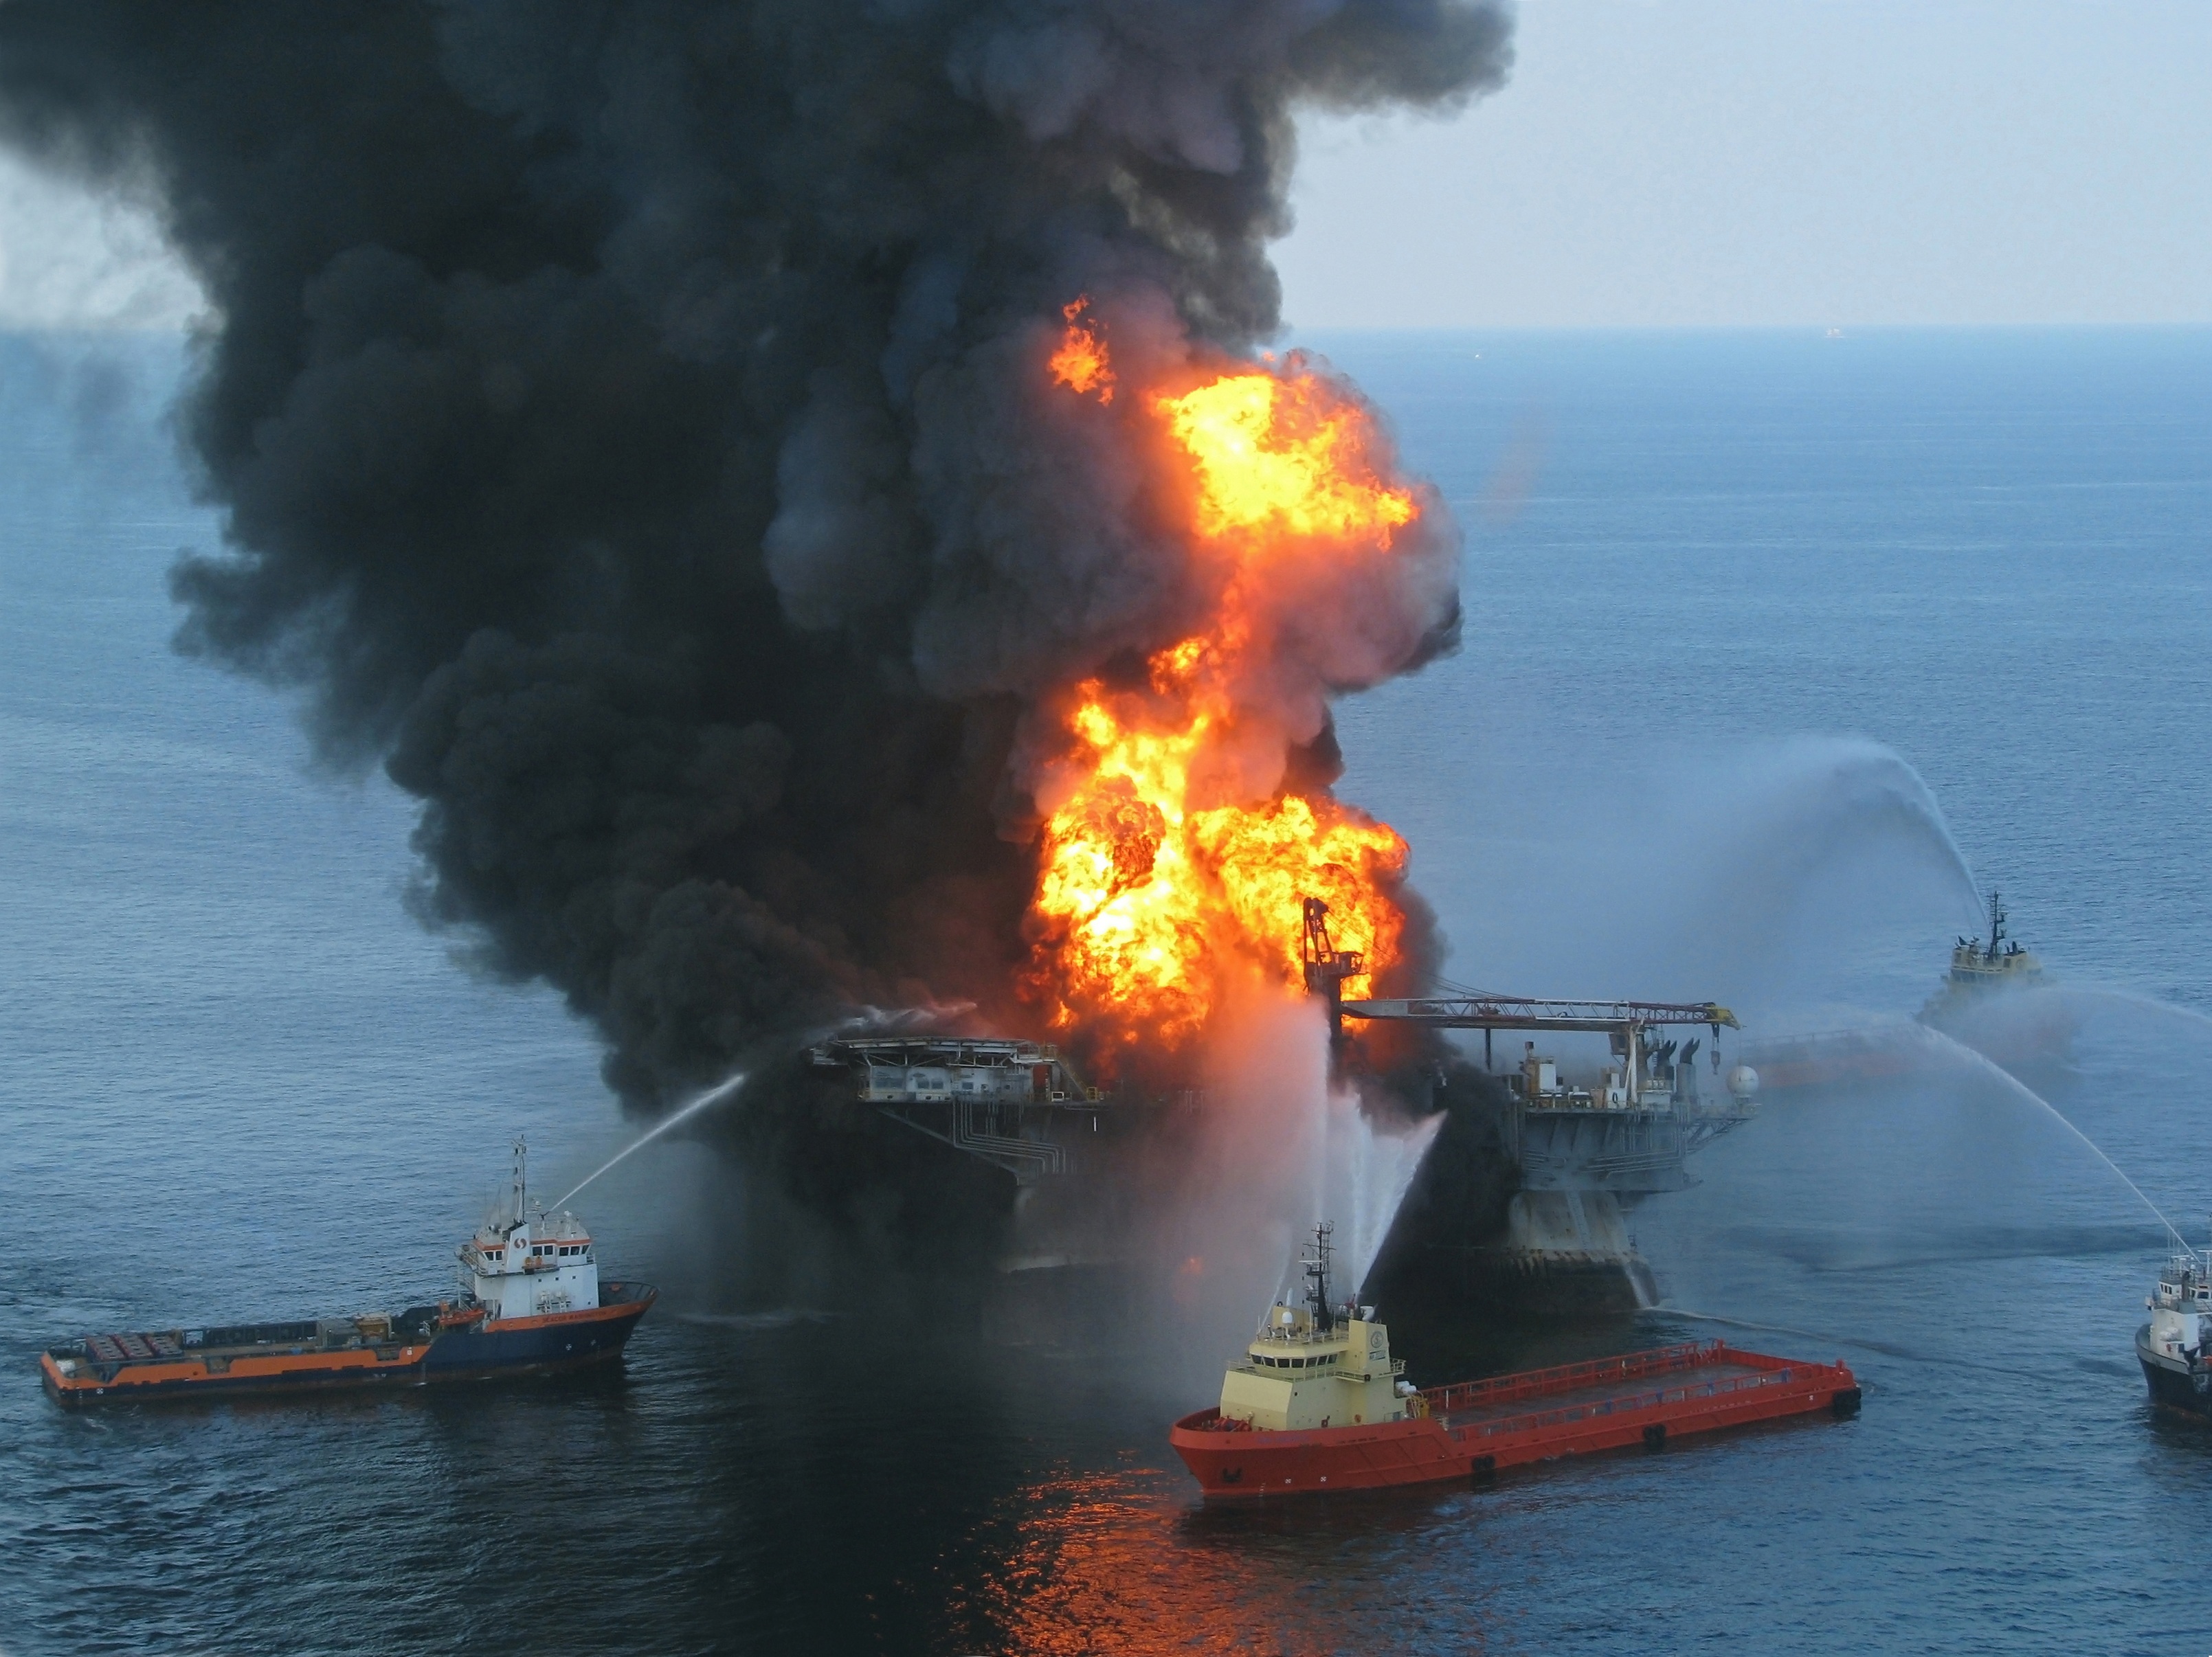 Explosion Oil Rig Boat Tugboat Fire Smoke Water 3219x2412